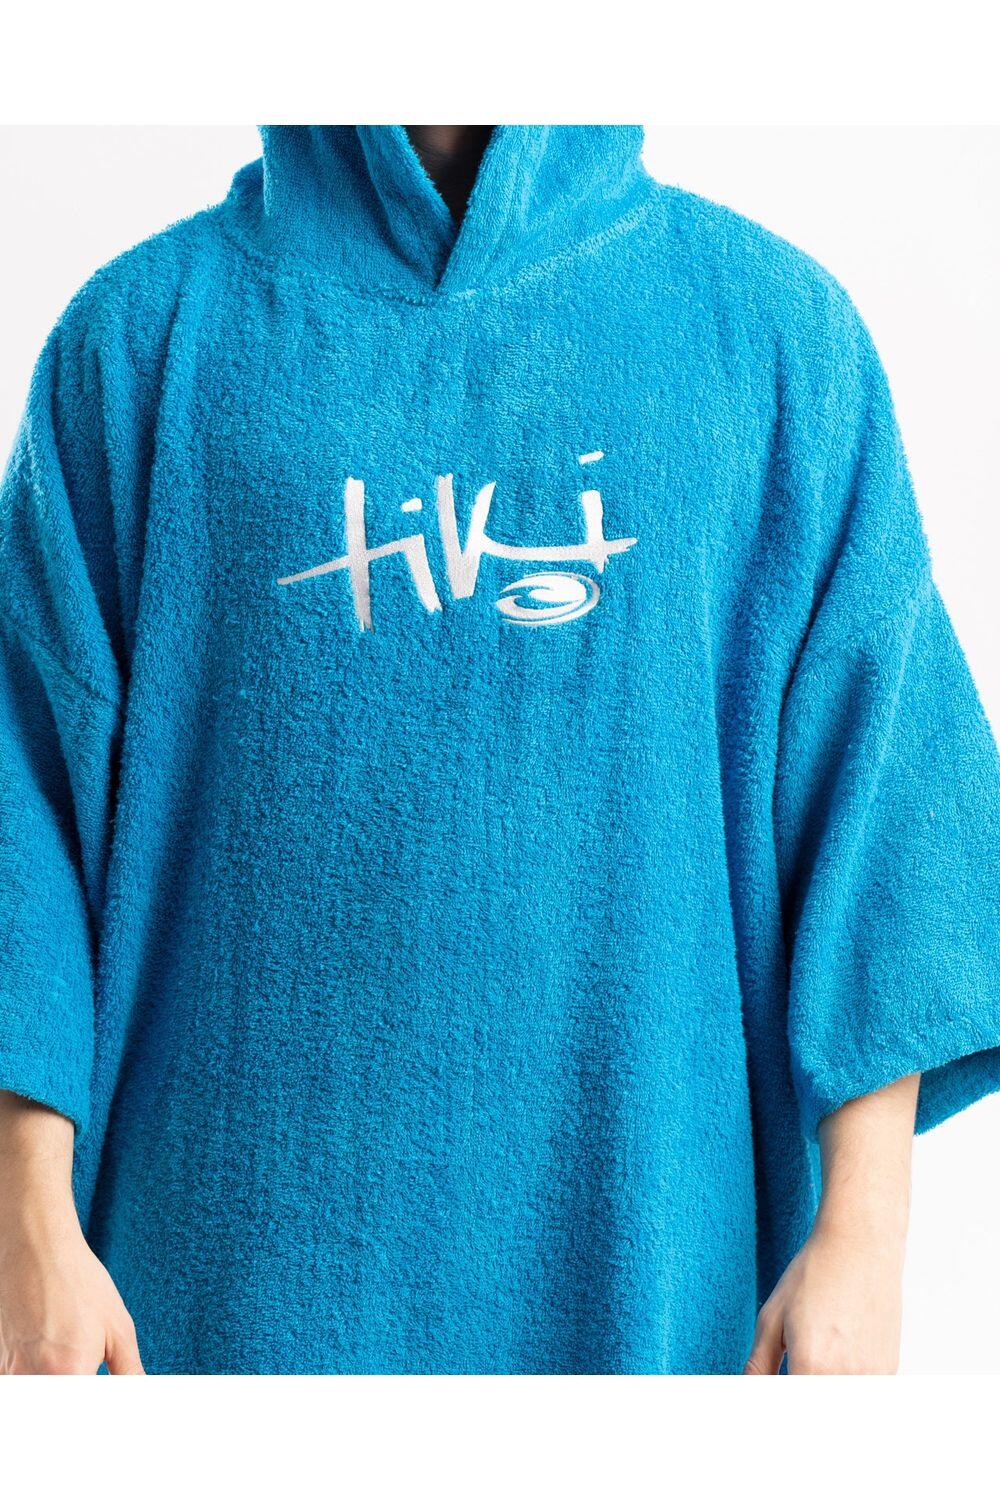 Adults Hooded Change Robe - Blue 6/7